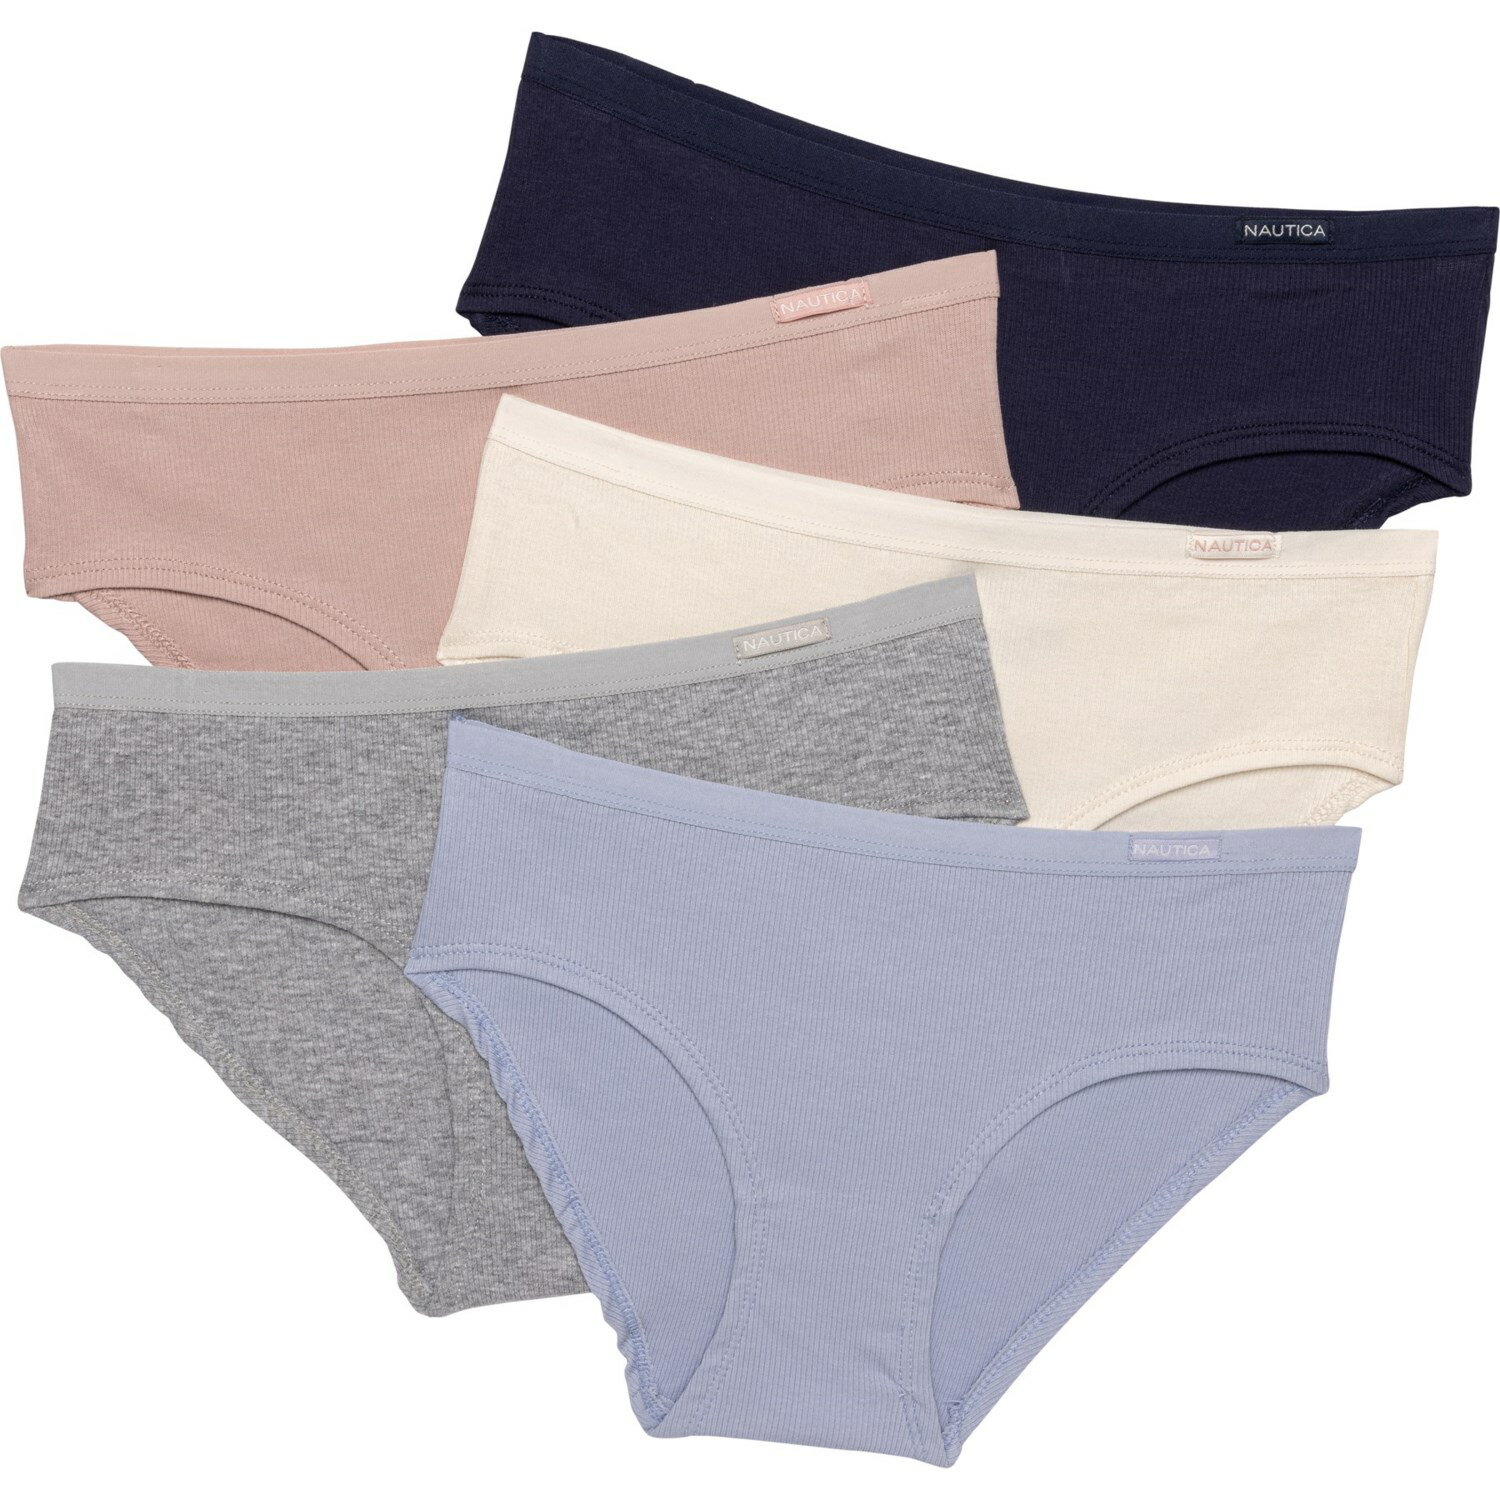 () Ρƥ ֥ ѥƥ - 5-ѥå, ˥å åȥ, ҥåץ Nautica Ribbed Panties - 5-Pack, Organic Cotton, Hipster Taupe/Pastel/Heather Grey/Chambray/Navy